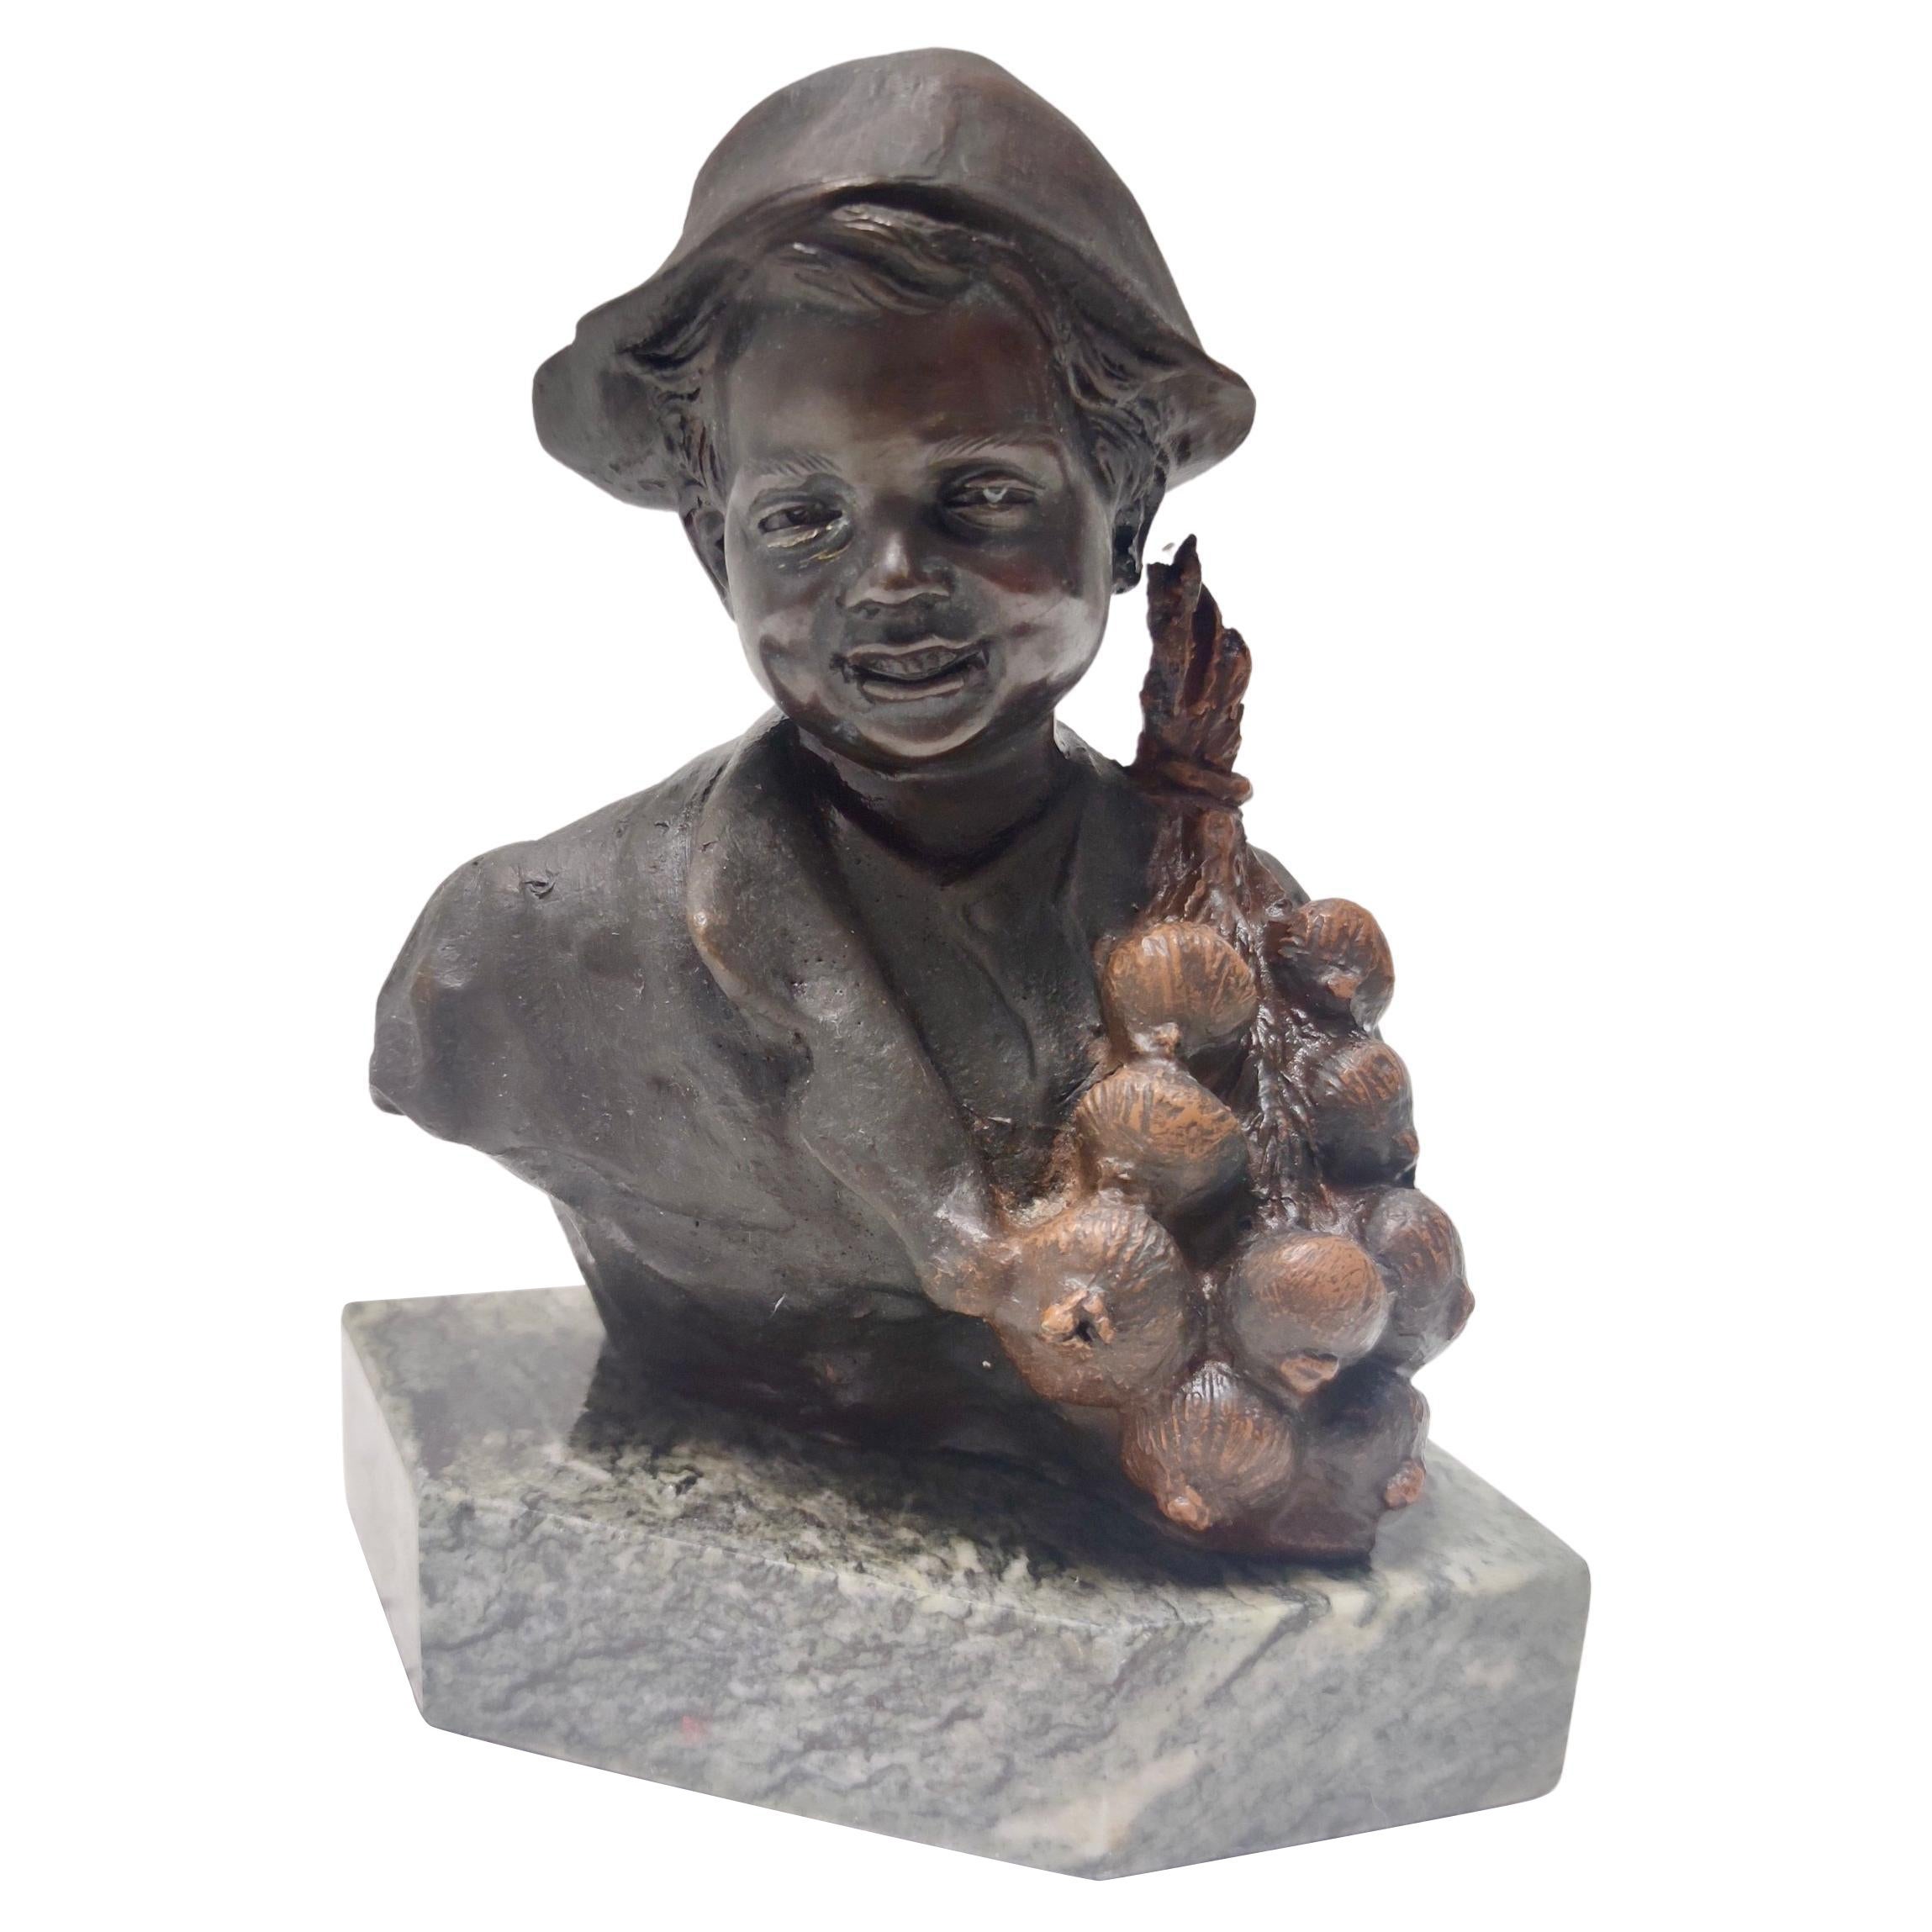 Vintage Bronze Decorative Item of a Child Selling Onions by De Martino, Italy